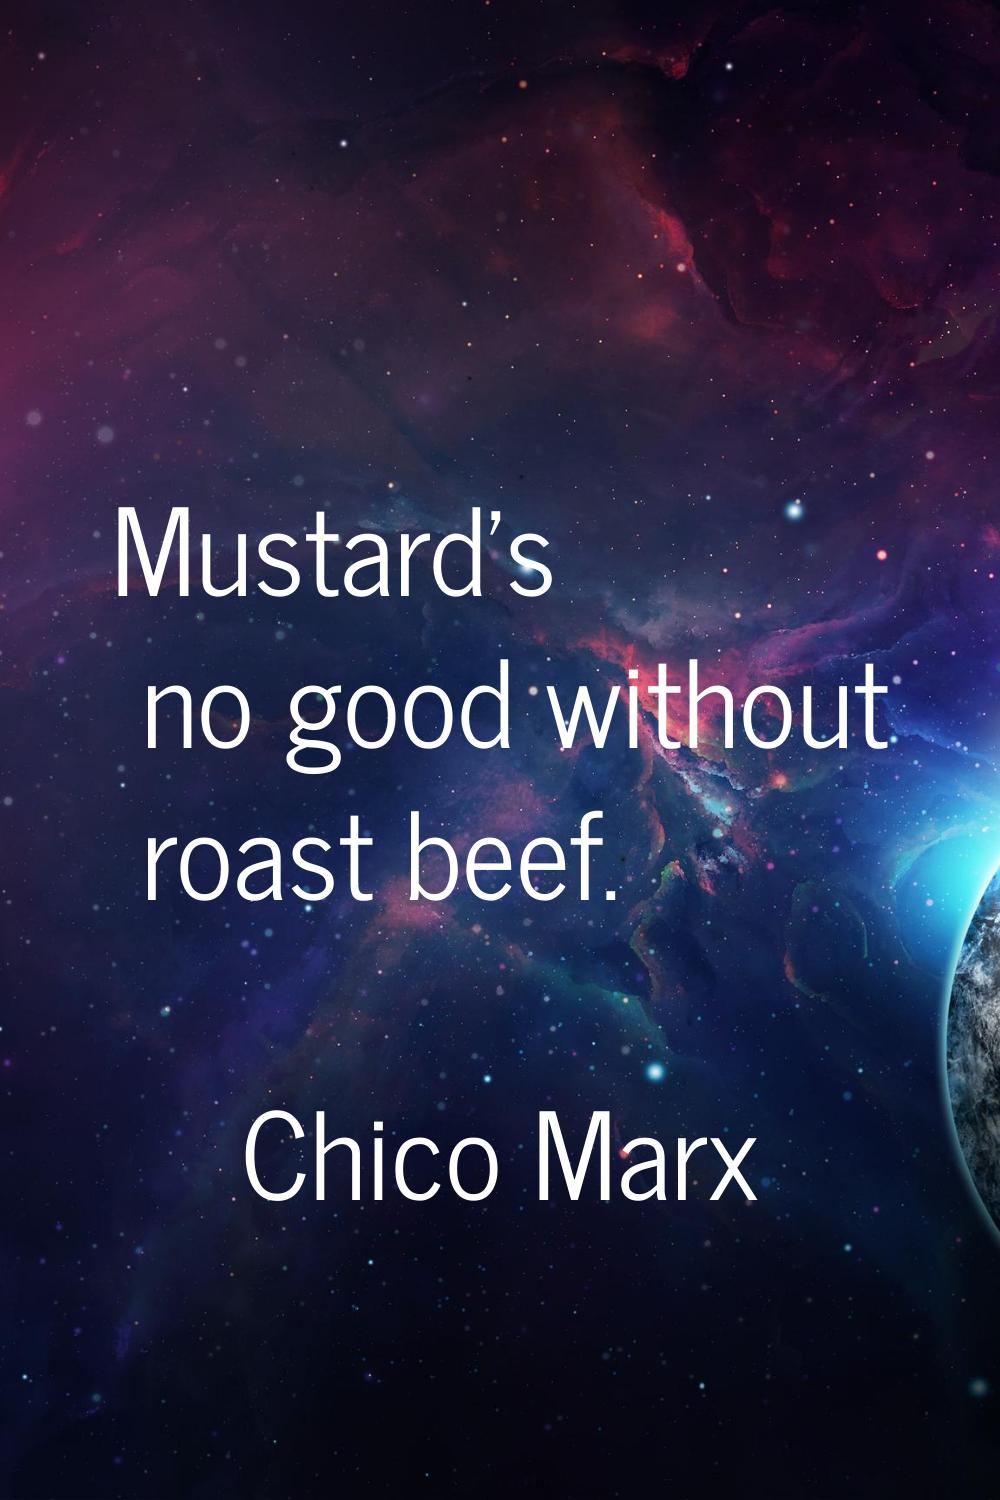 Mustard's no good without roast beef.